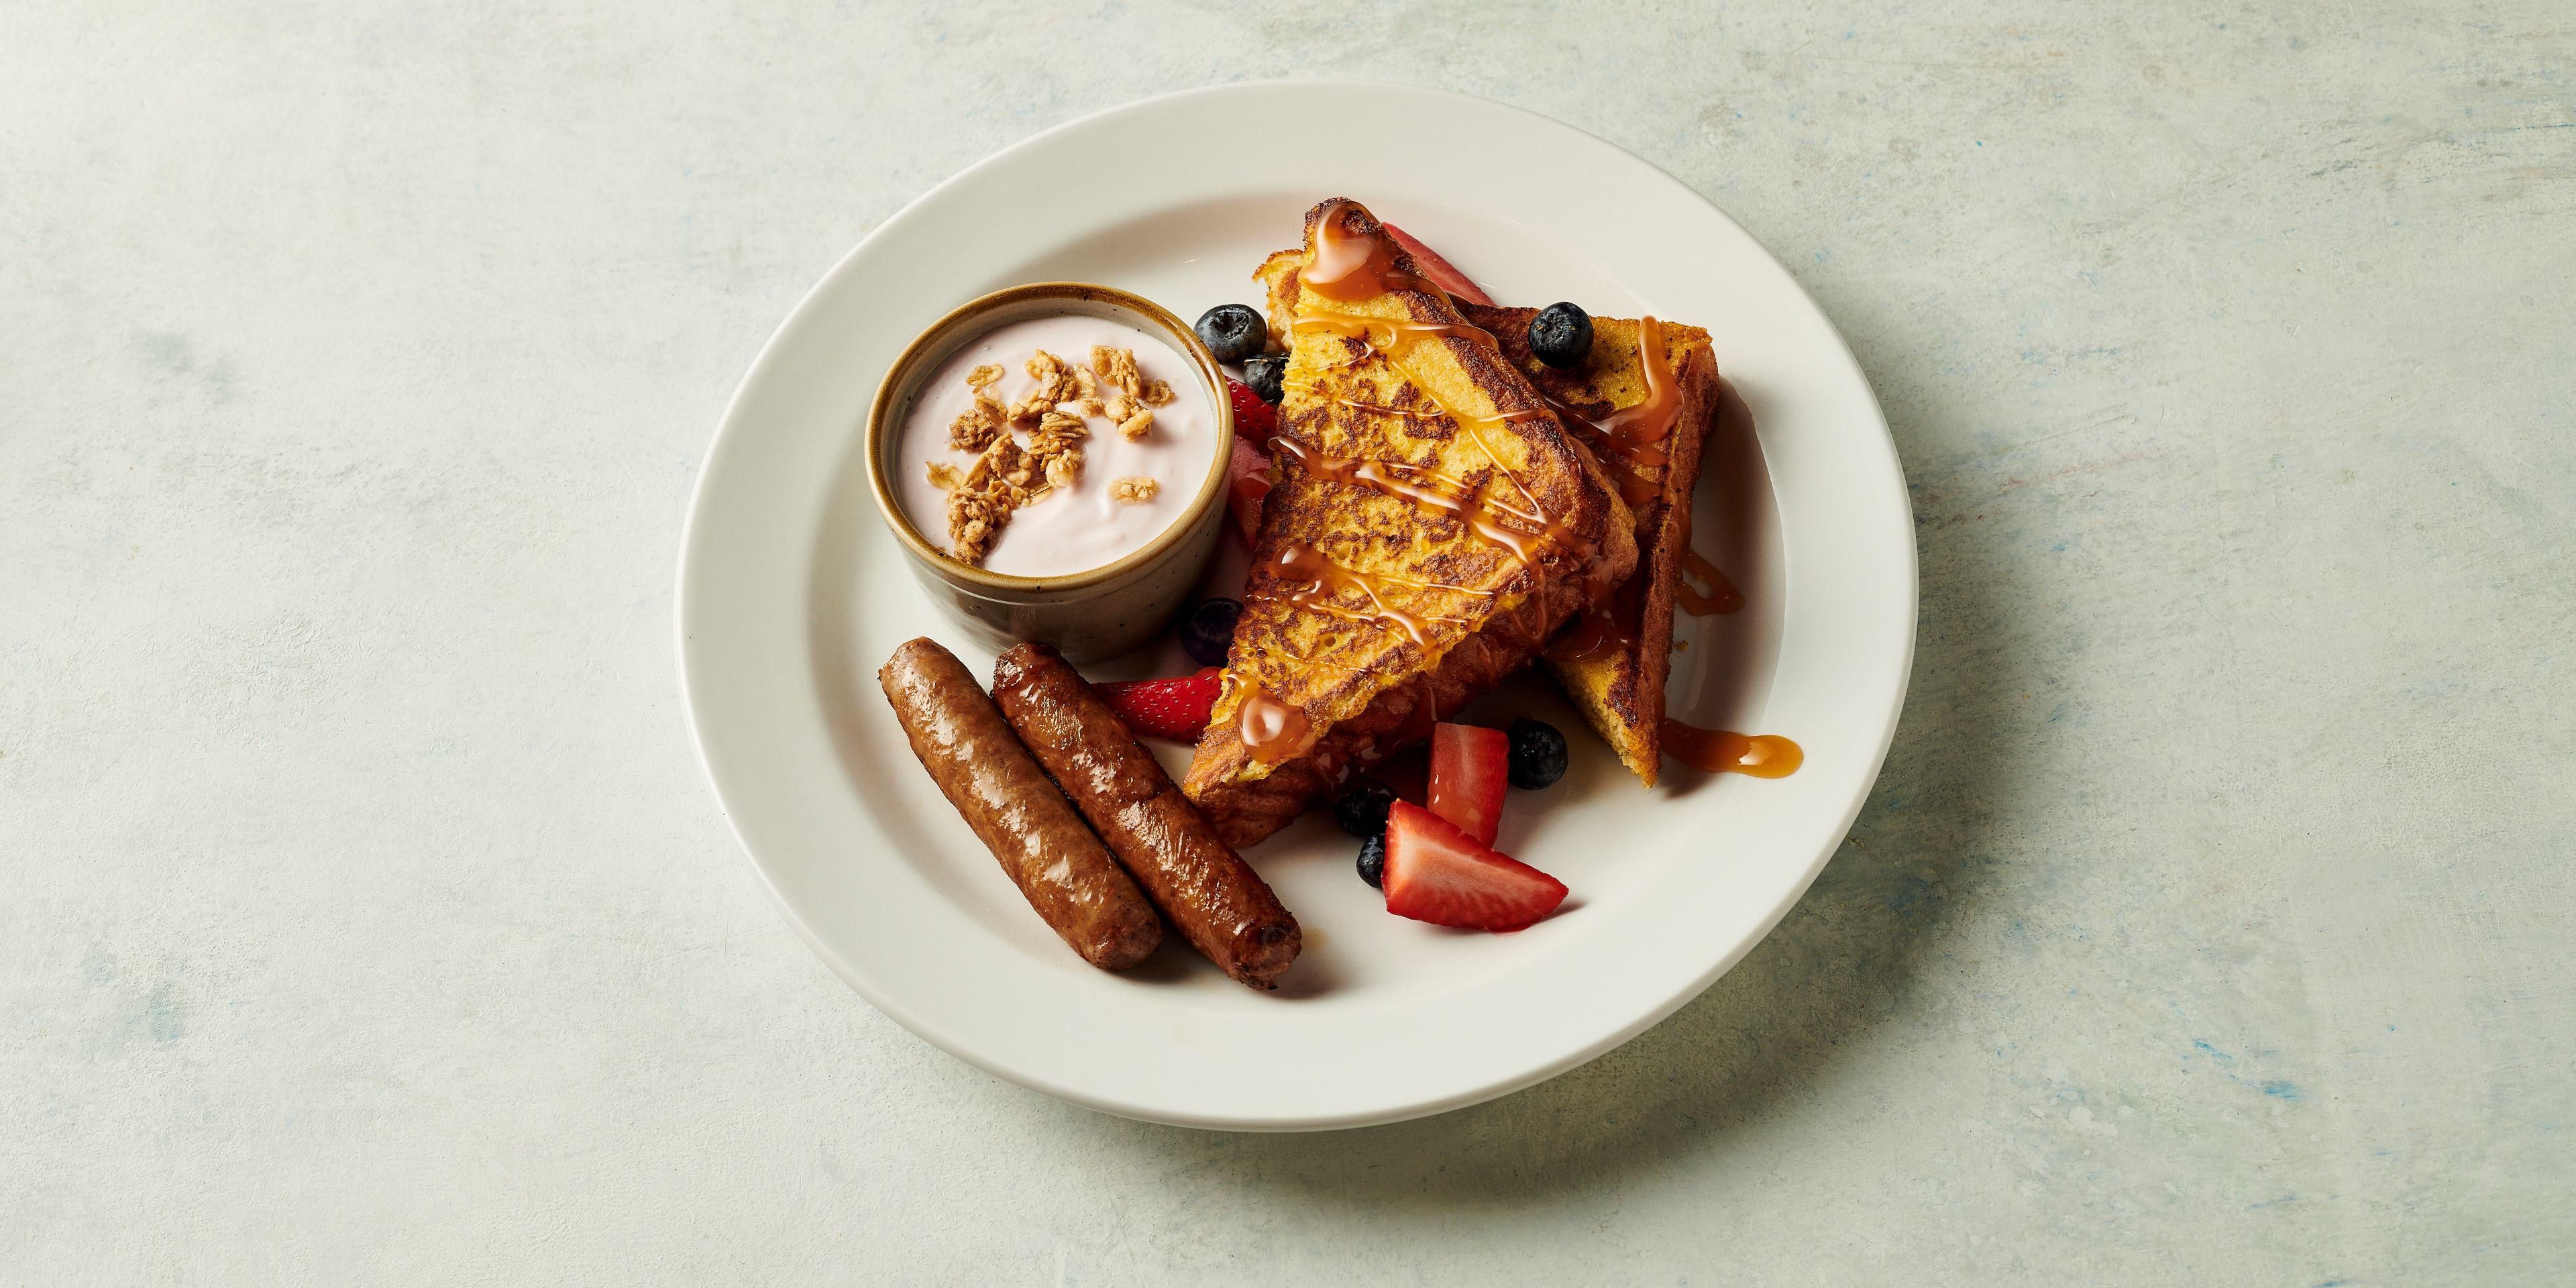 Decadent French toast with fresh fruit, yogurt, and sausage